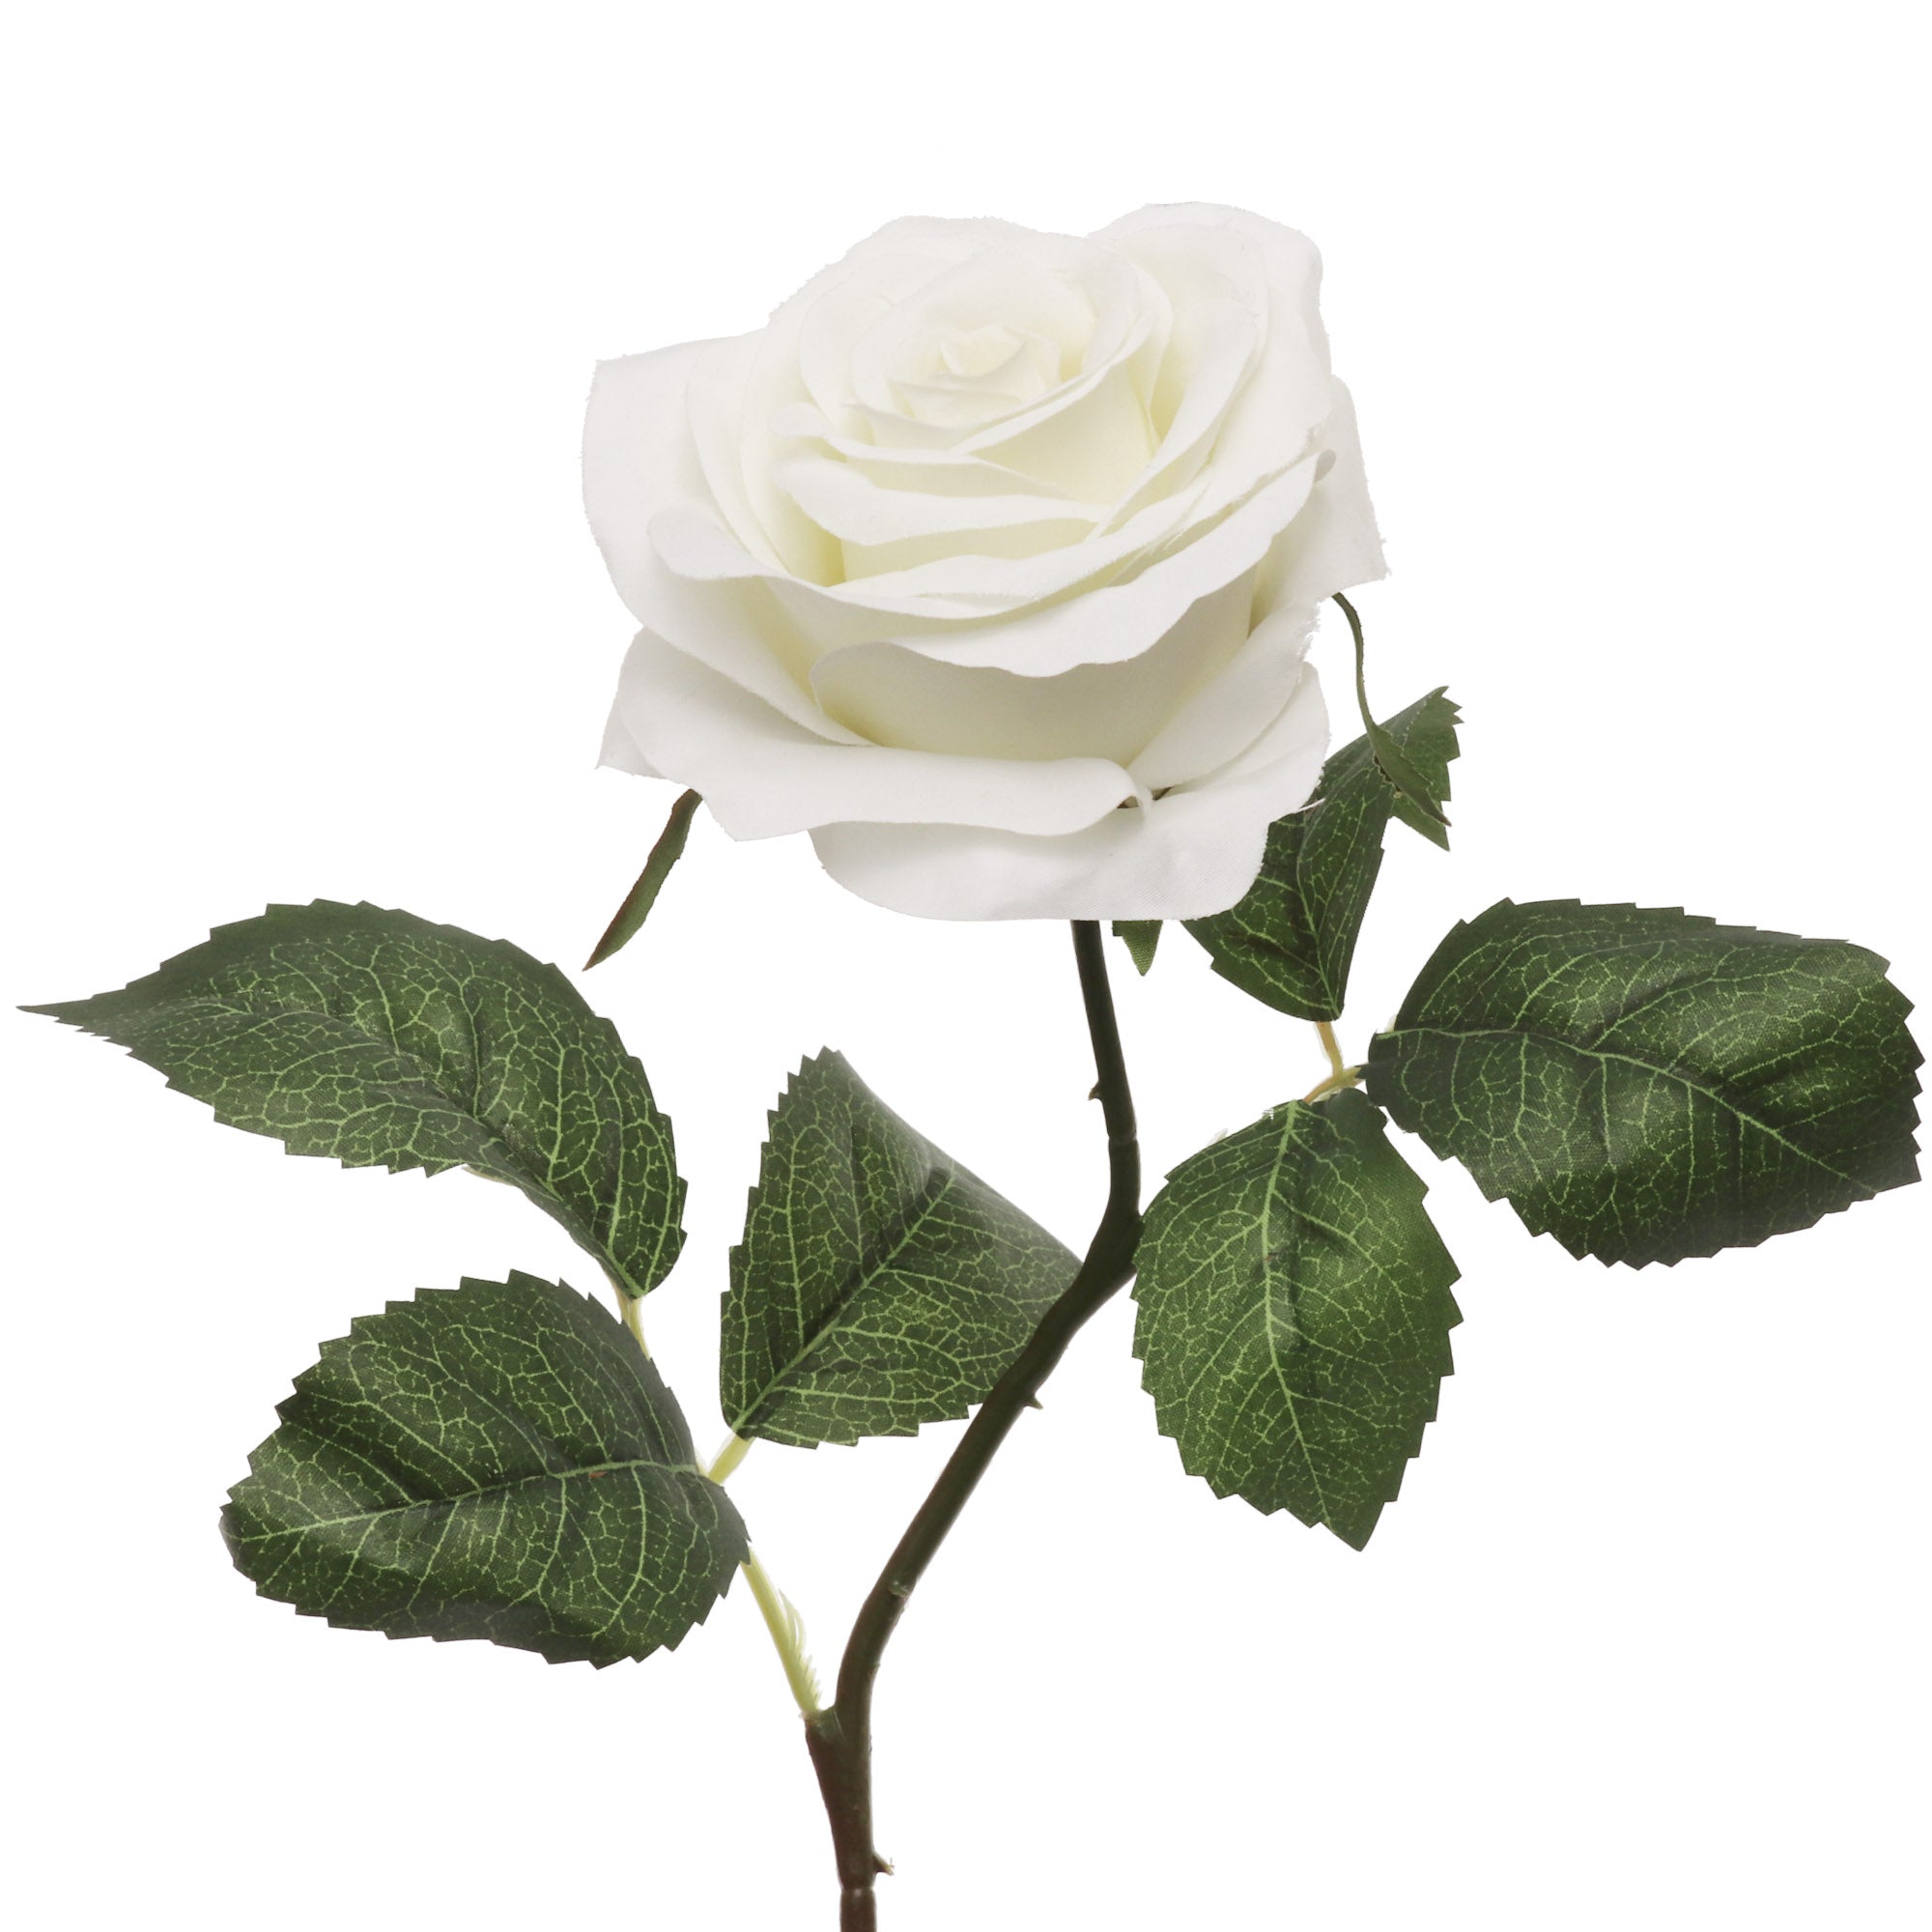 Elegant 20-inch White Open Rose with 4" Diameter - Ideal for Weddings, Home Decor, and Sympathy Arrangements